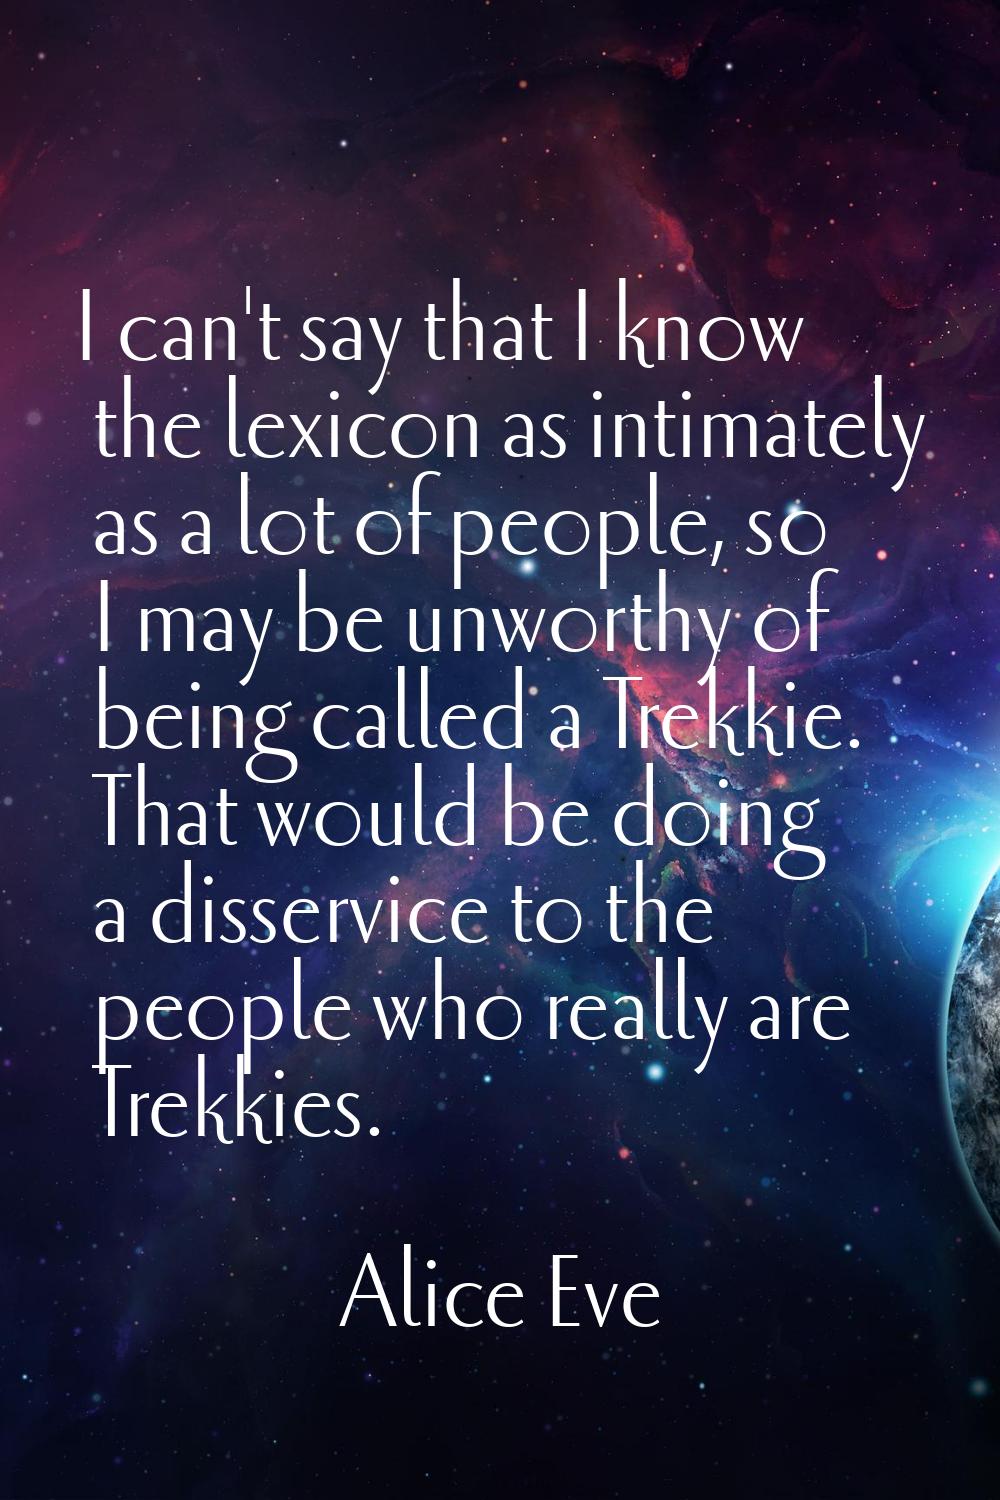 I can't say that I know the lexicon as intimately as a lot of people, so I may be unworthy of being